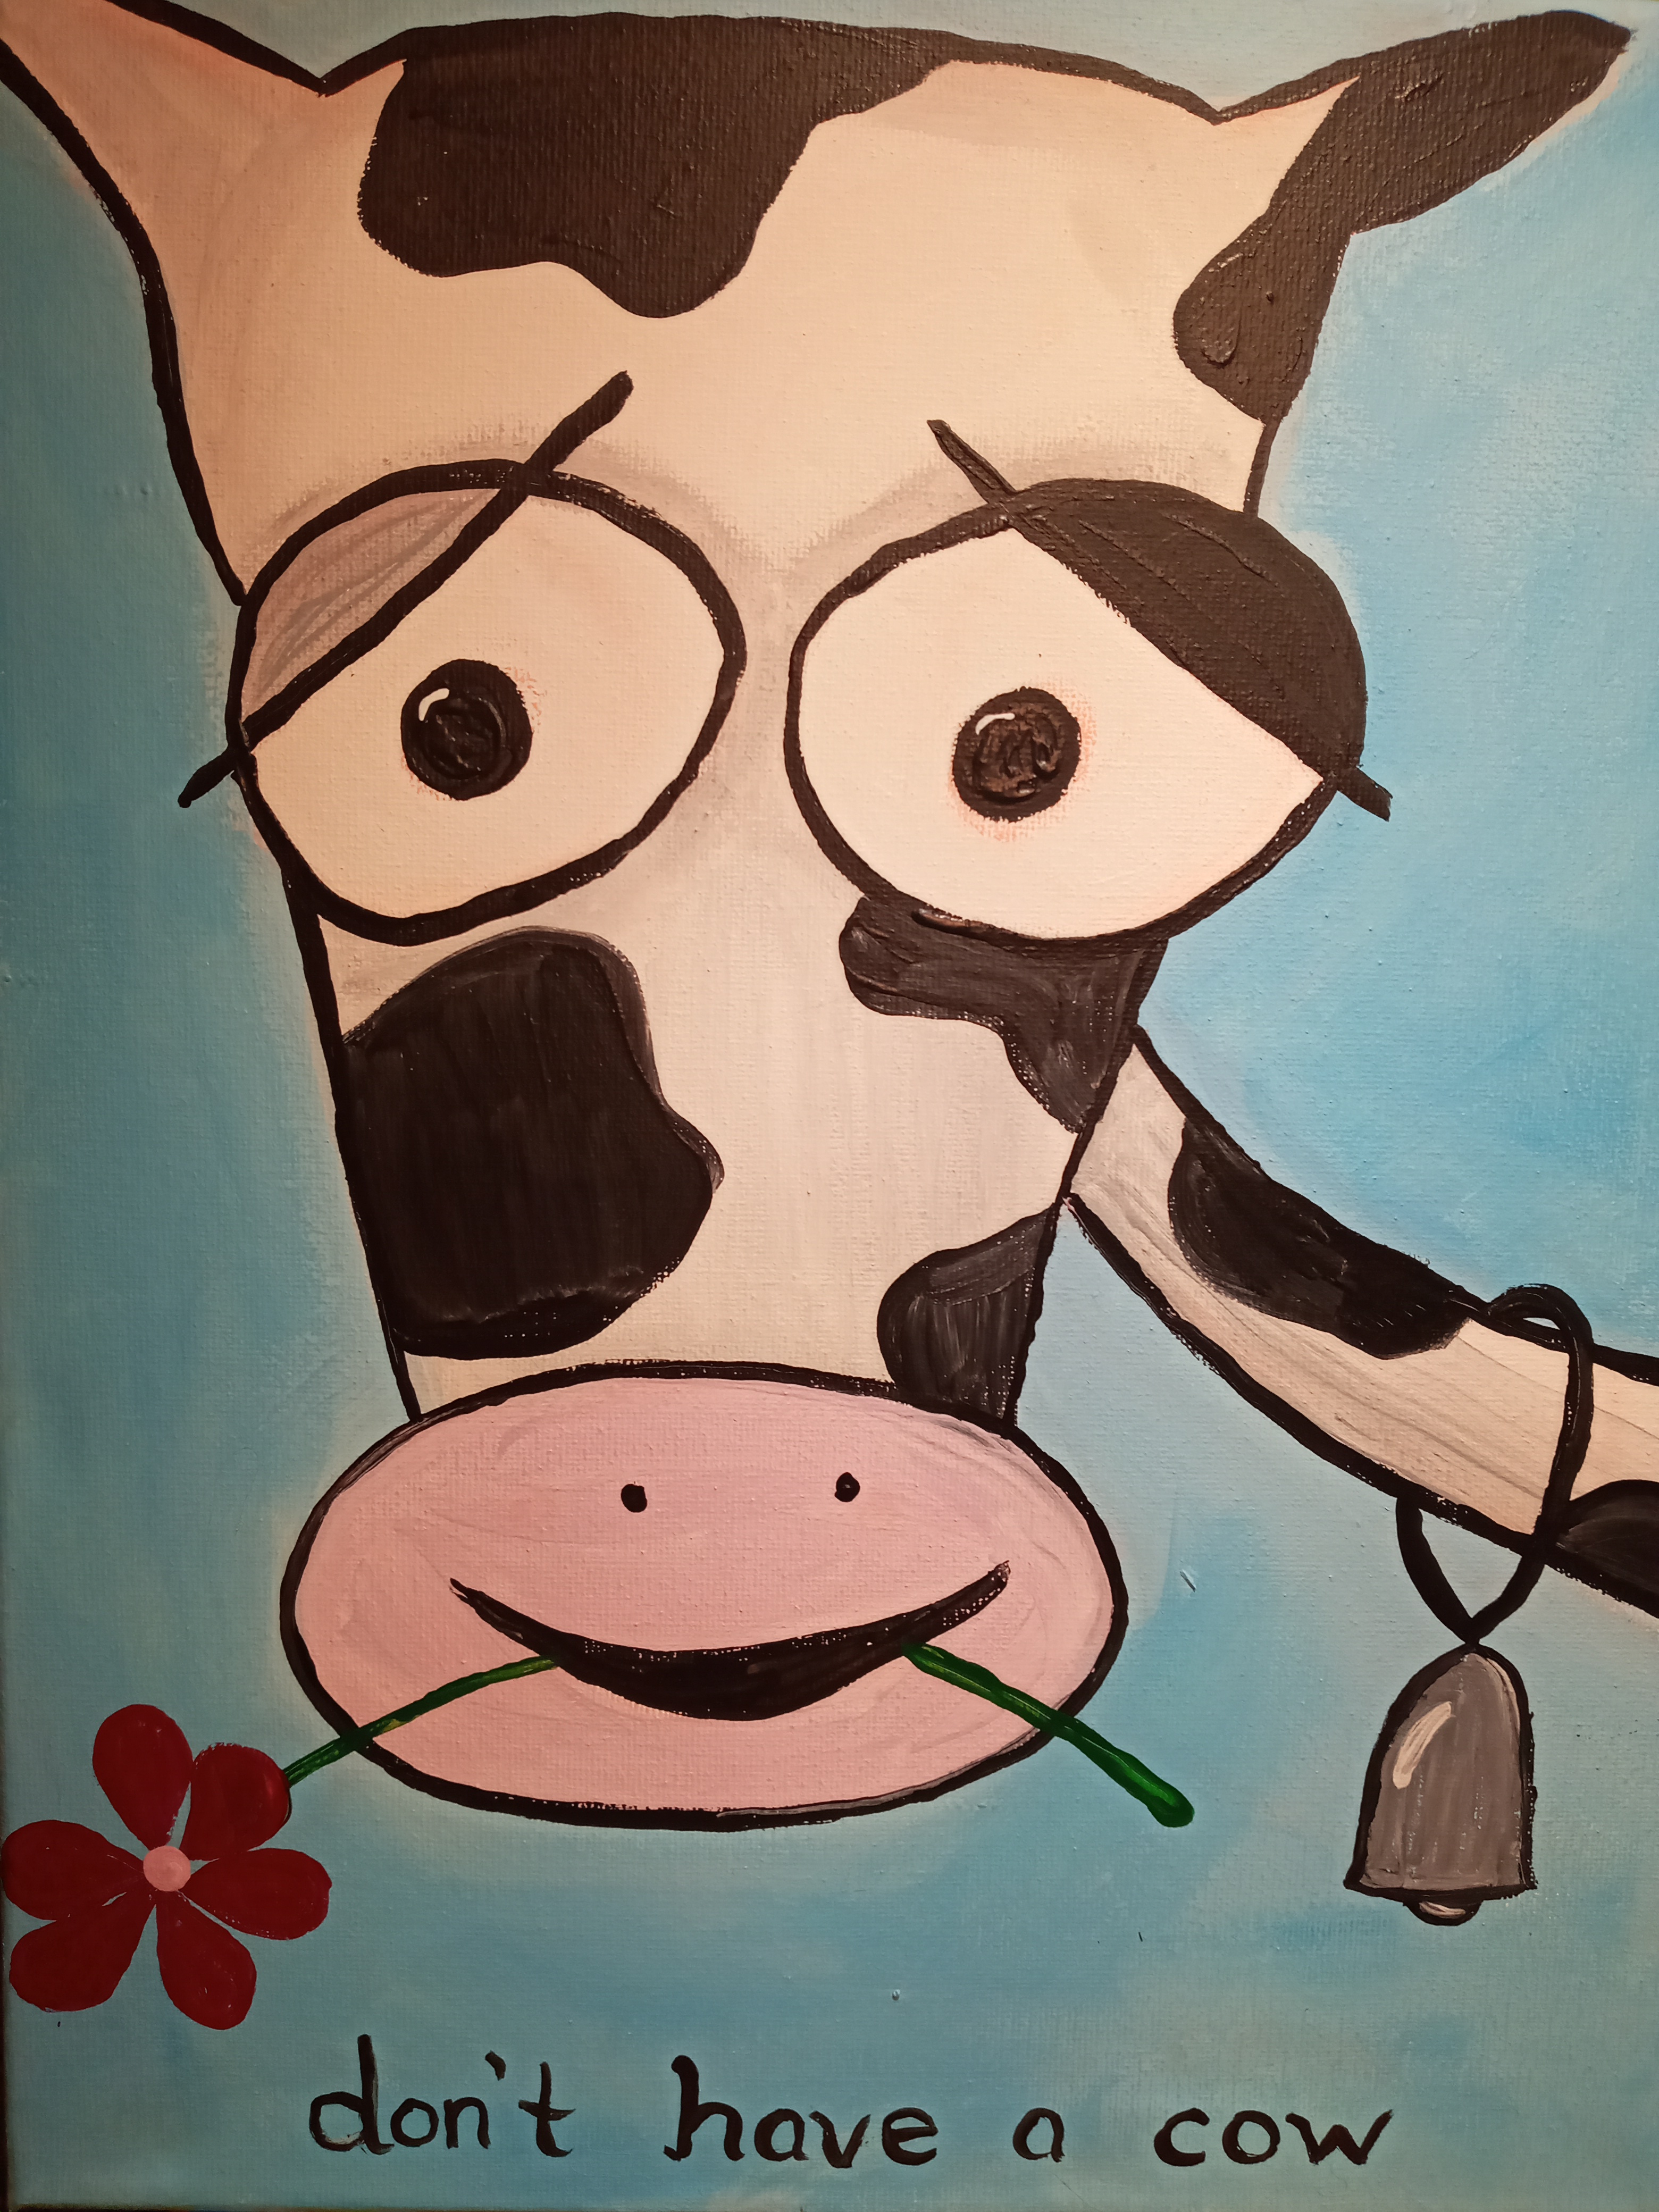 A Paint a Cute Cow experience project by Yaymaker